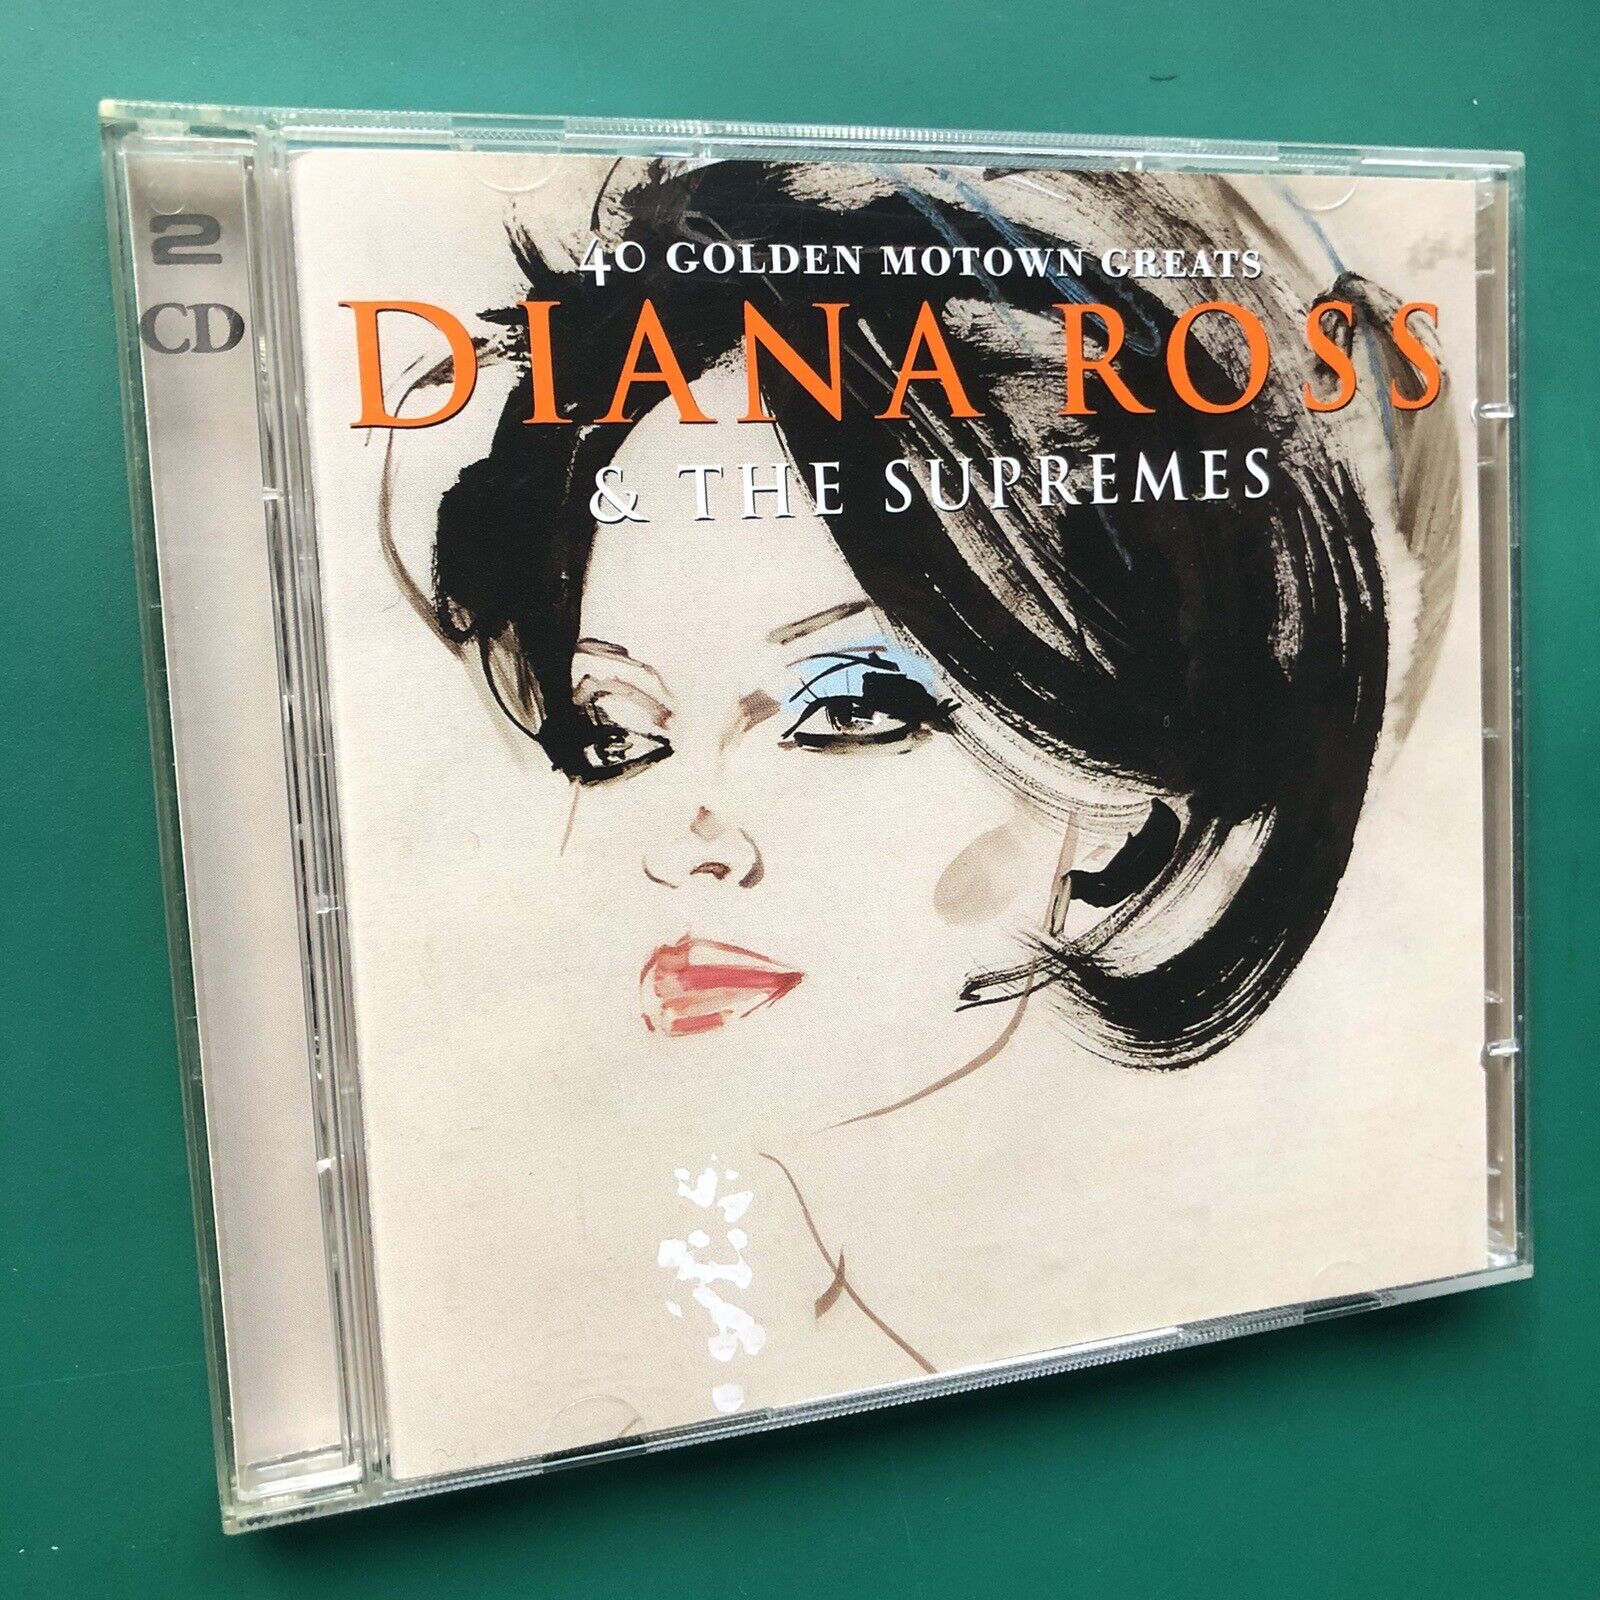 Diana Ross & The Supremes 40 GOLDEN MOTOWN GREATS Funk RnB Soul 2 x CD Baby Love